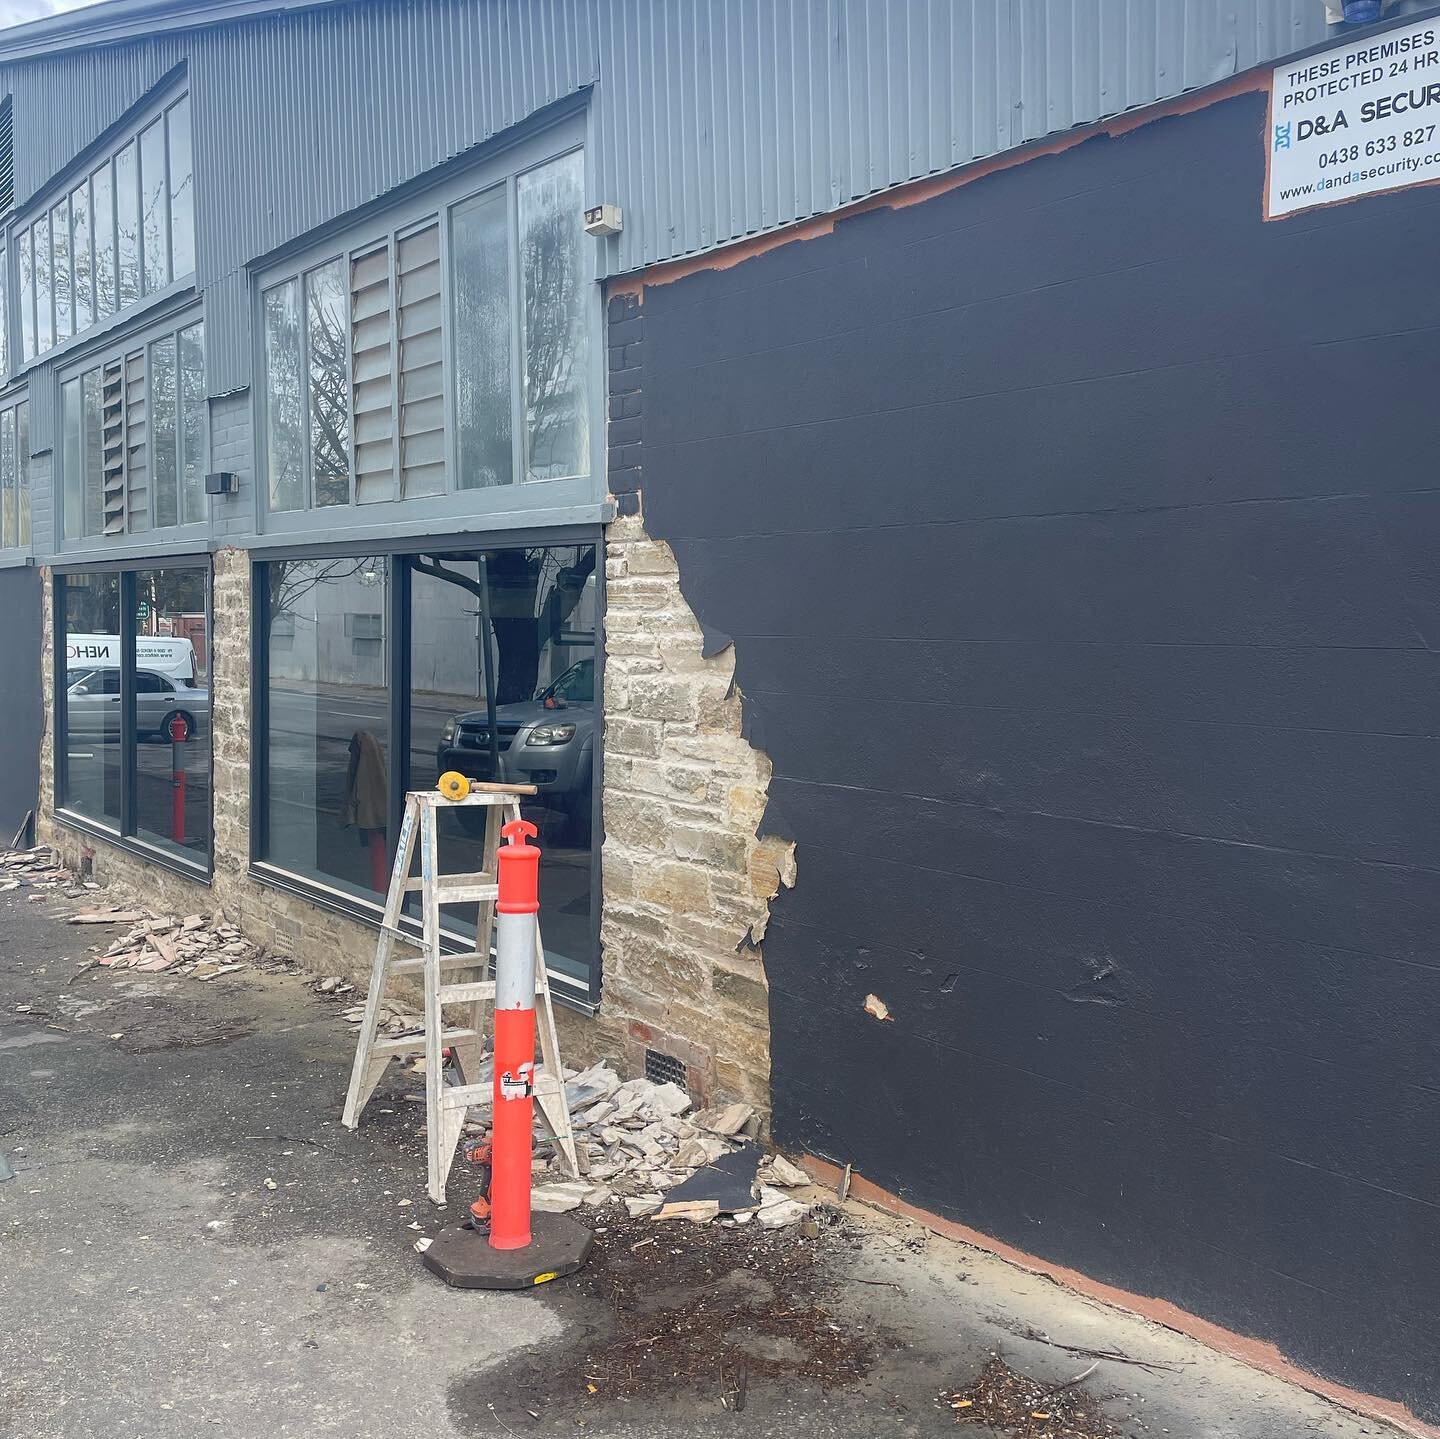 Making finishing progress back at the Lobethal Mill. Cement render removed and stone work pointed after a bit of tidying, love and redress. Limewash going on on the inside after flaking paint and blown flushing compounds removed. Really enjoying all 